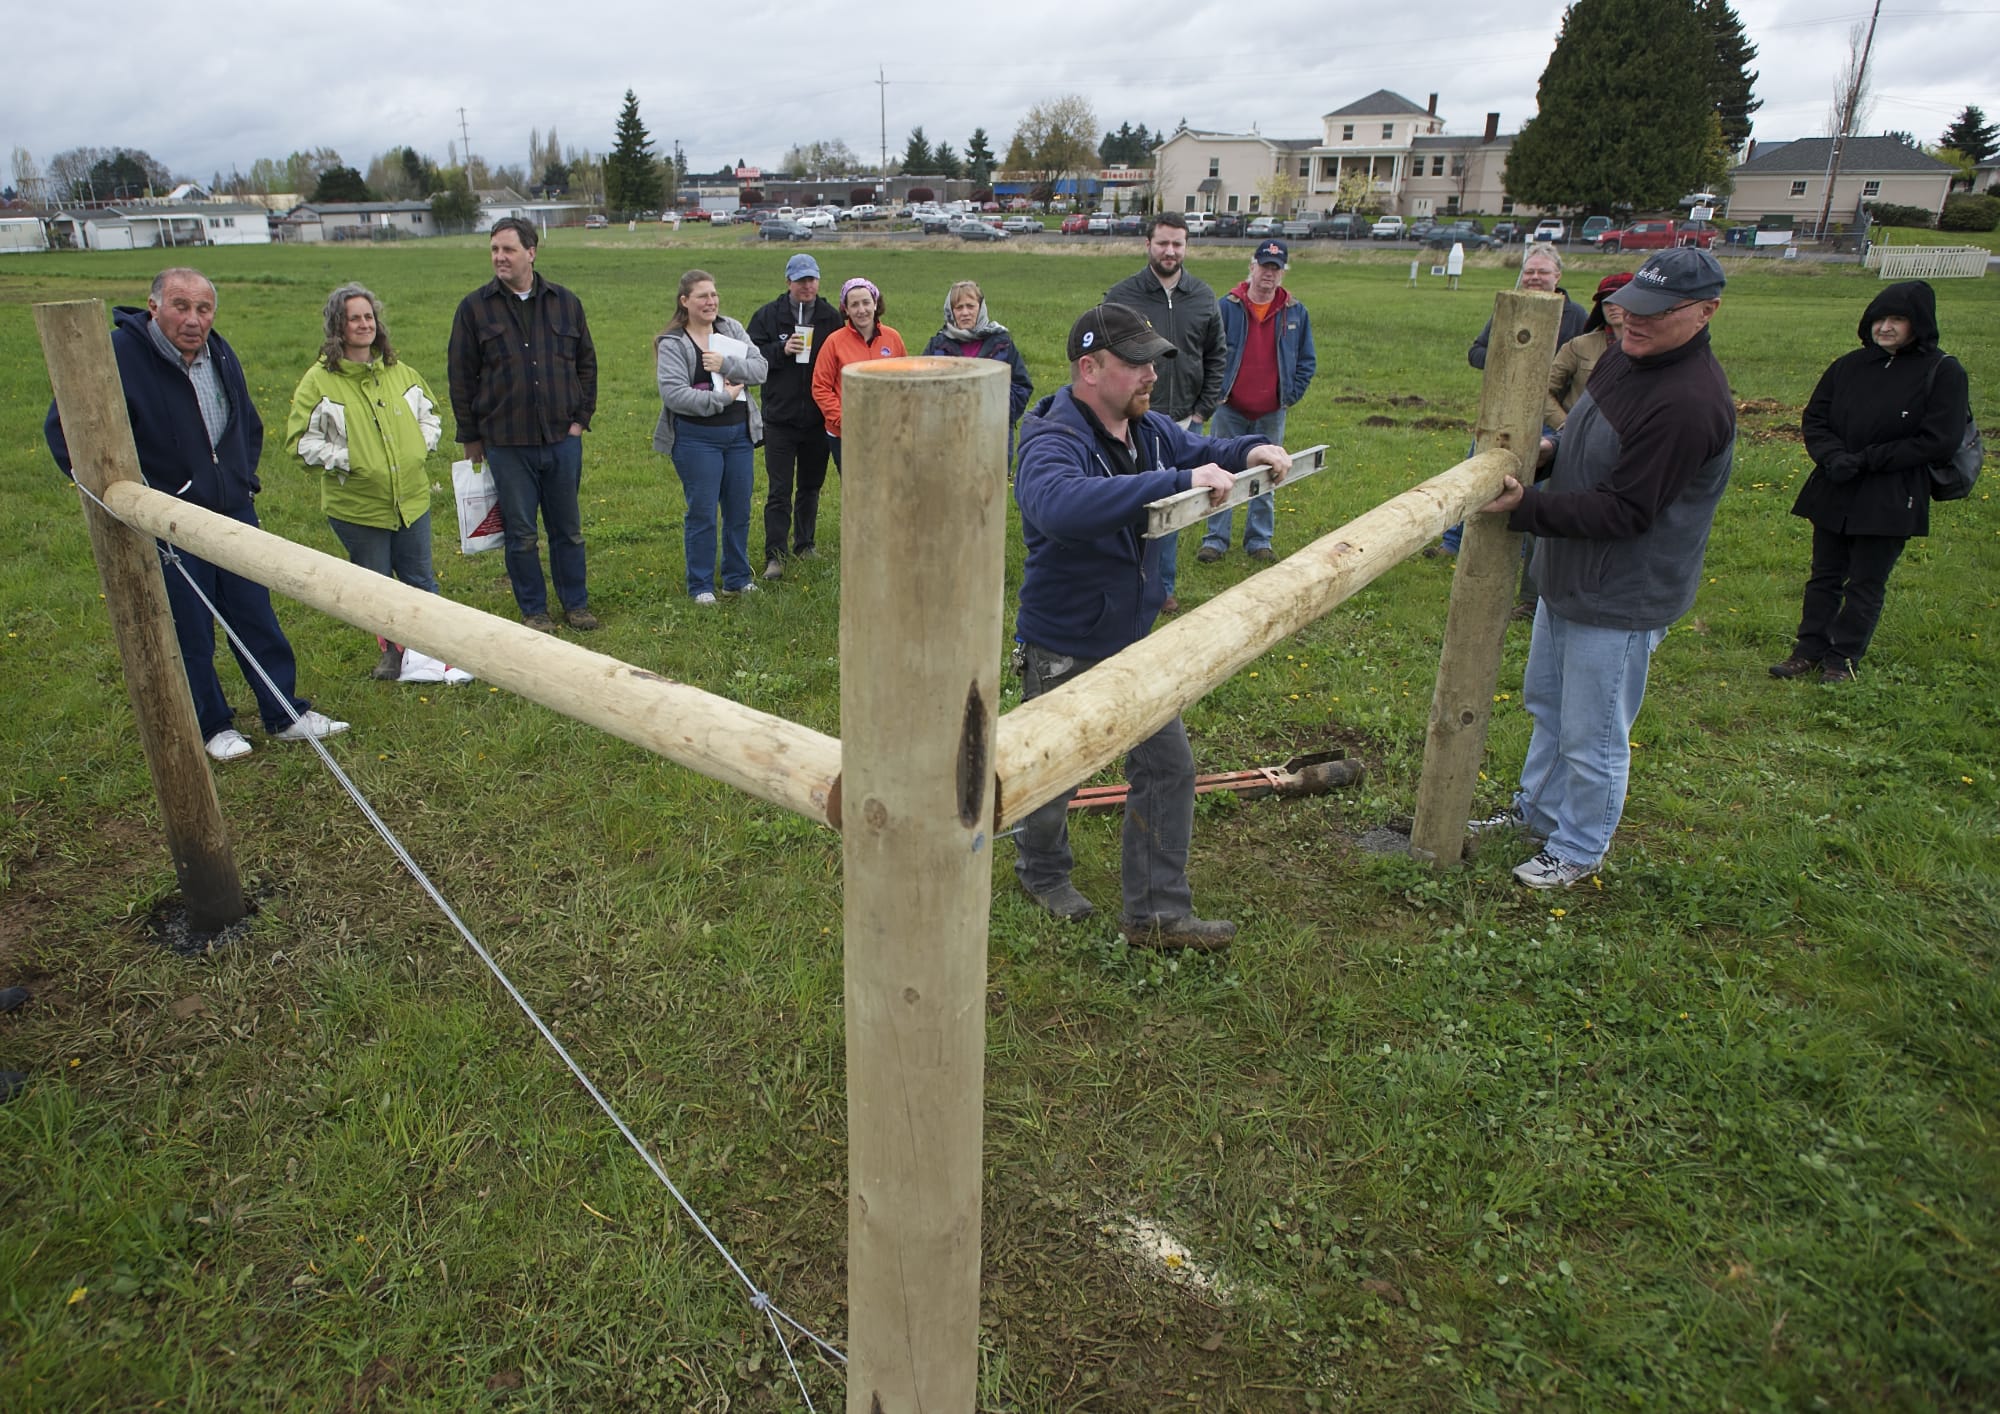 Trevor Prothero, center right, of Wilco farm supply uses a level to check a post while leading a fence-building class last month at the ninth annual Small Acreage Expo at 78th Street Heritage Farm. New federal data show that while total acreage and farms were in decline in Clark County, the number of farms working 9 acres or less grew significantly.